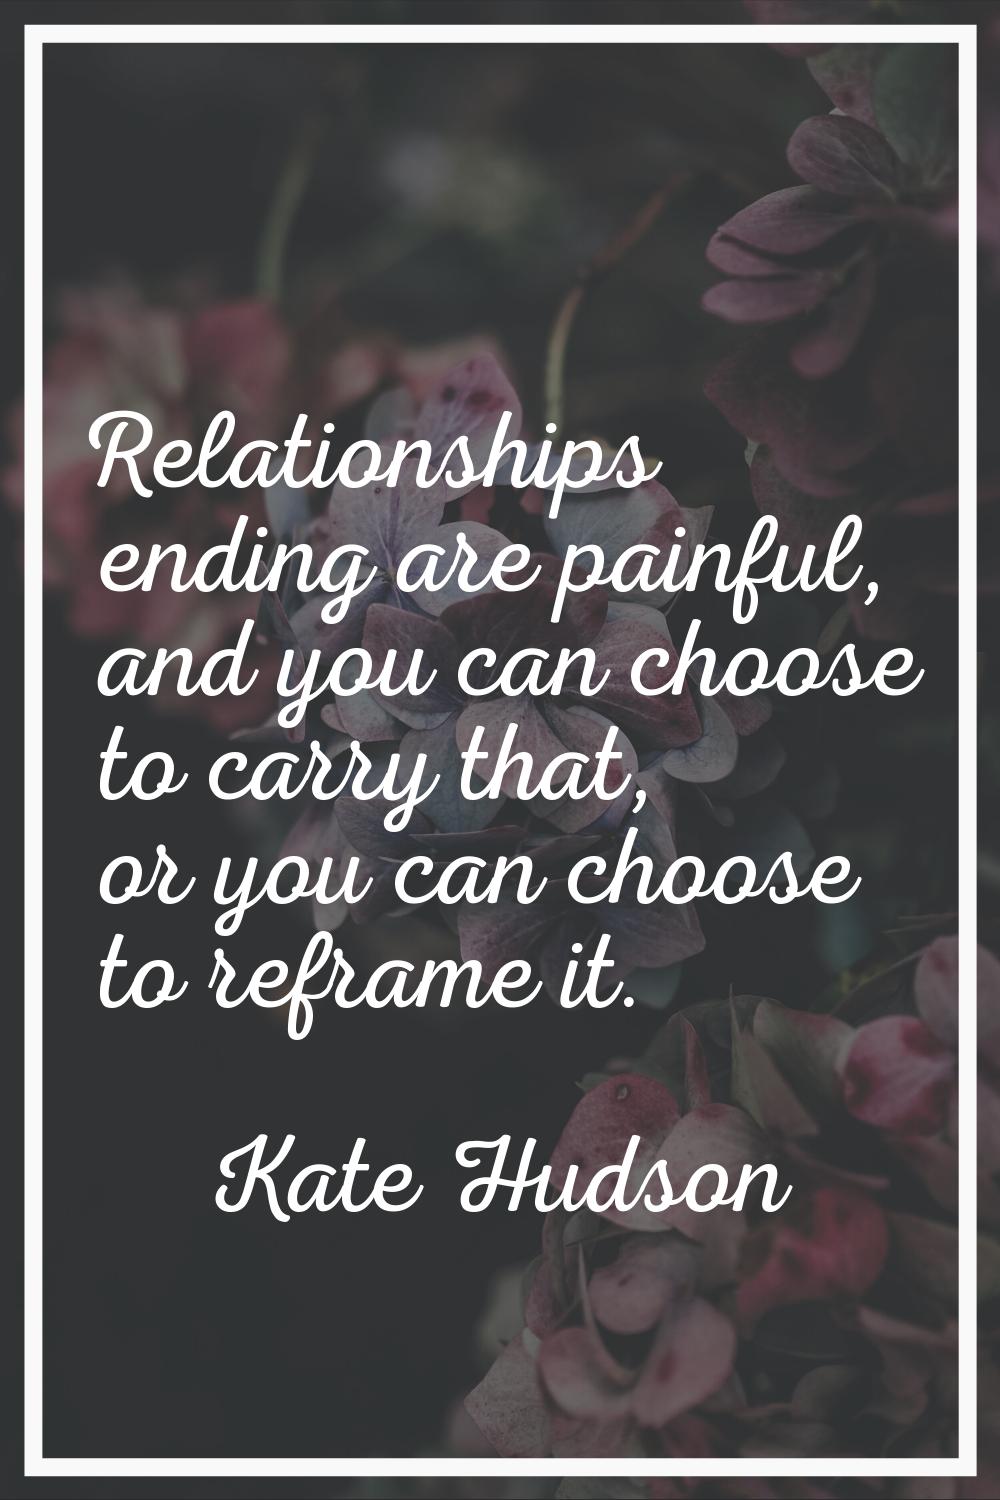 Relationships ending are painful, and you can choose to carry that, or you can choose to reframe it